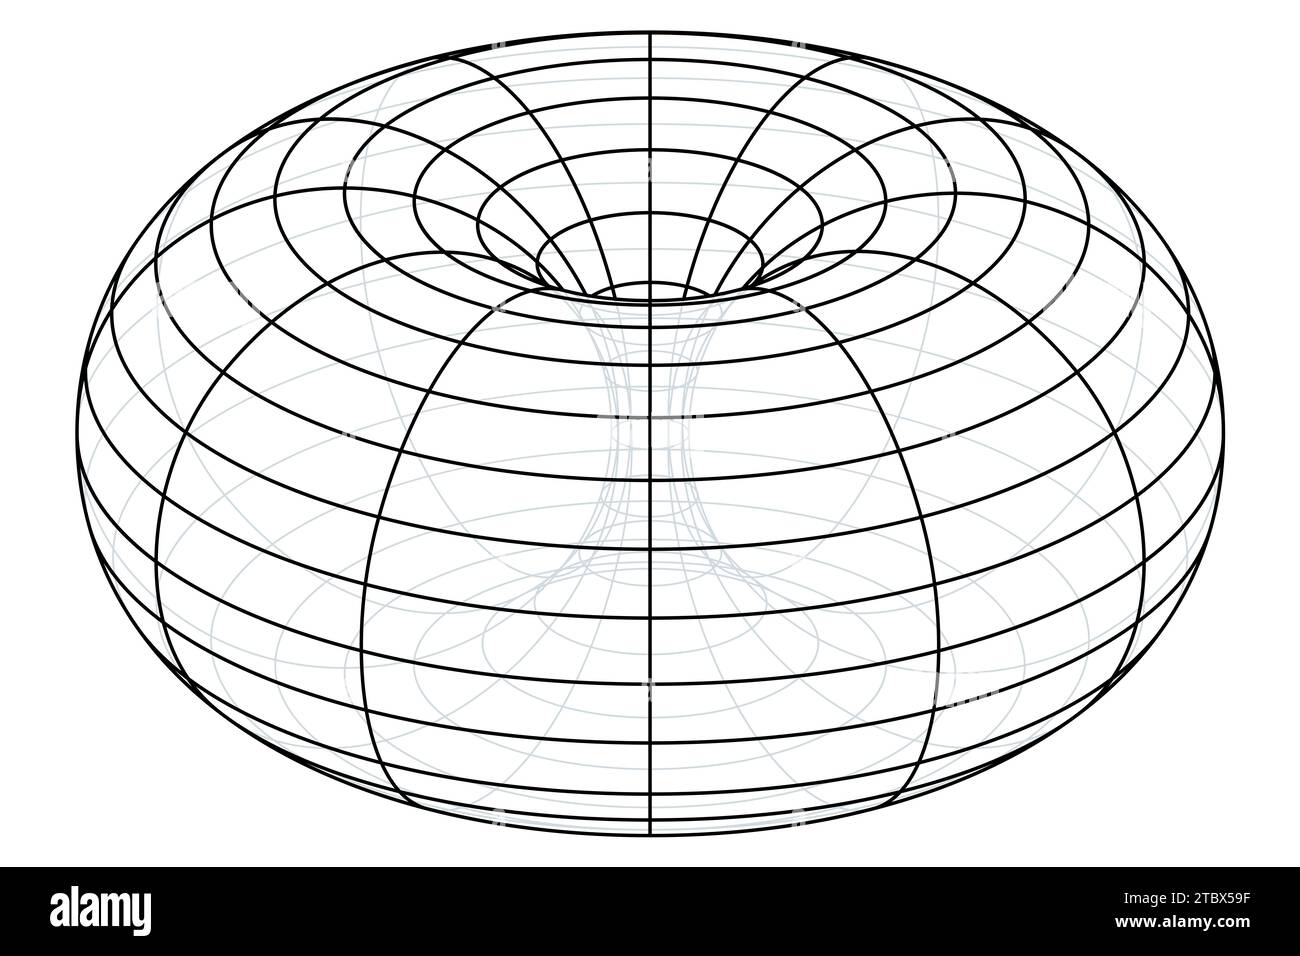 Wire-frame of a ring torus, also donut or doughnut. Geometrical surface of revolution generated by revolving a circle in 3D space one full revolution. Stock Photo